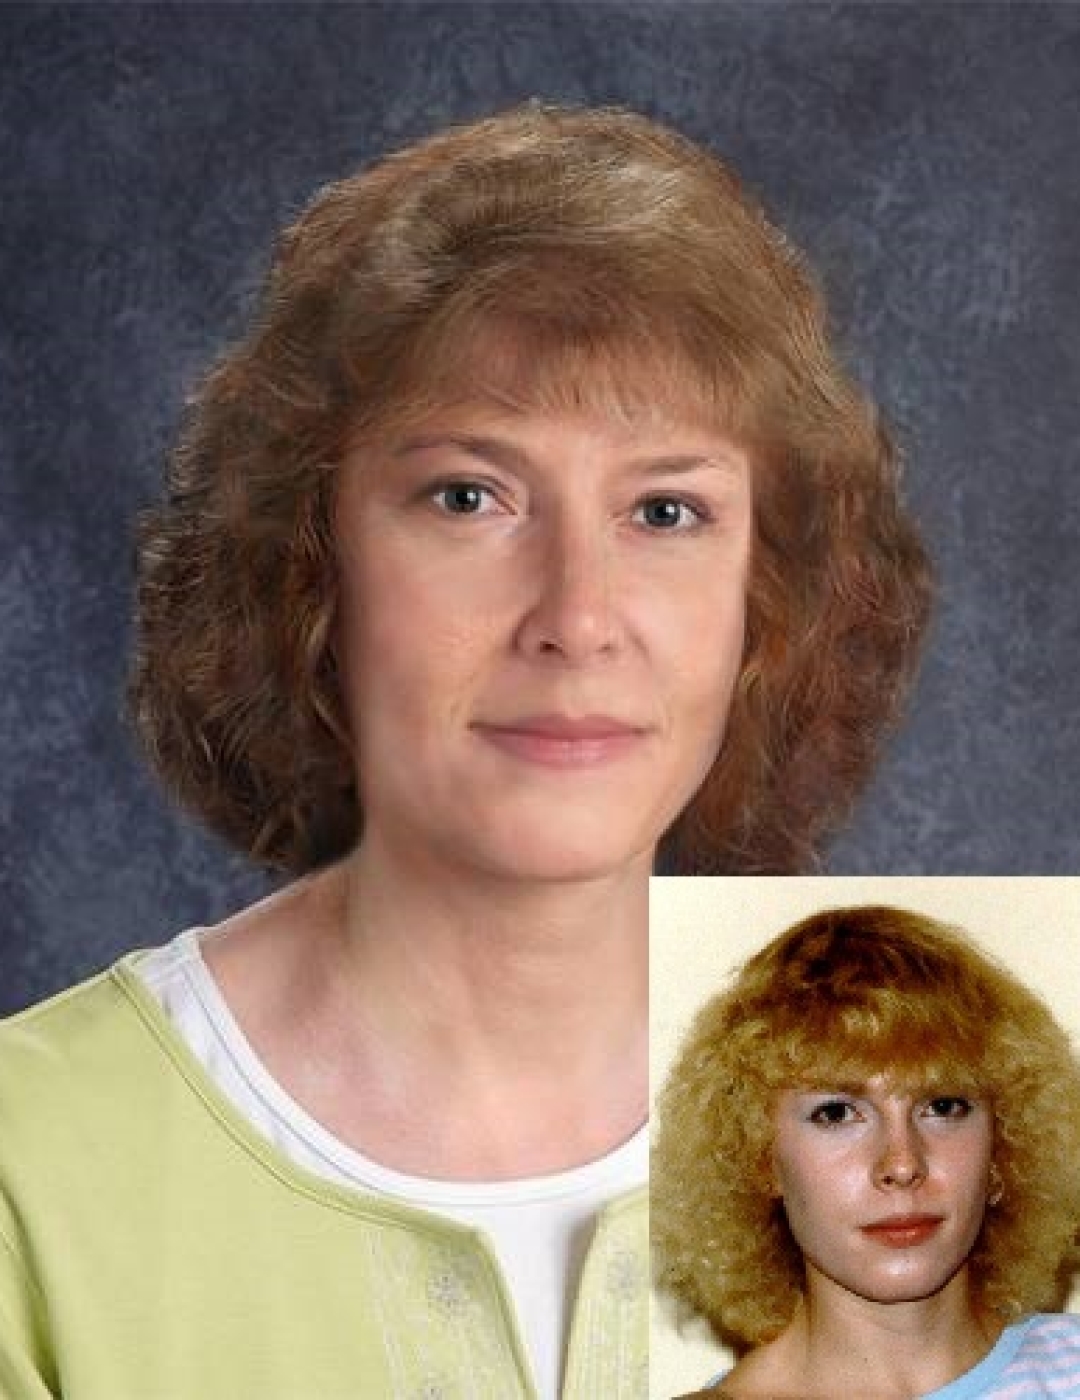 Jennifer Douglas. Missing woman with curly blonde hair and blue-green eyes.